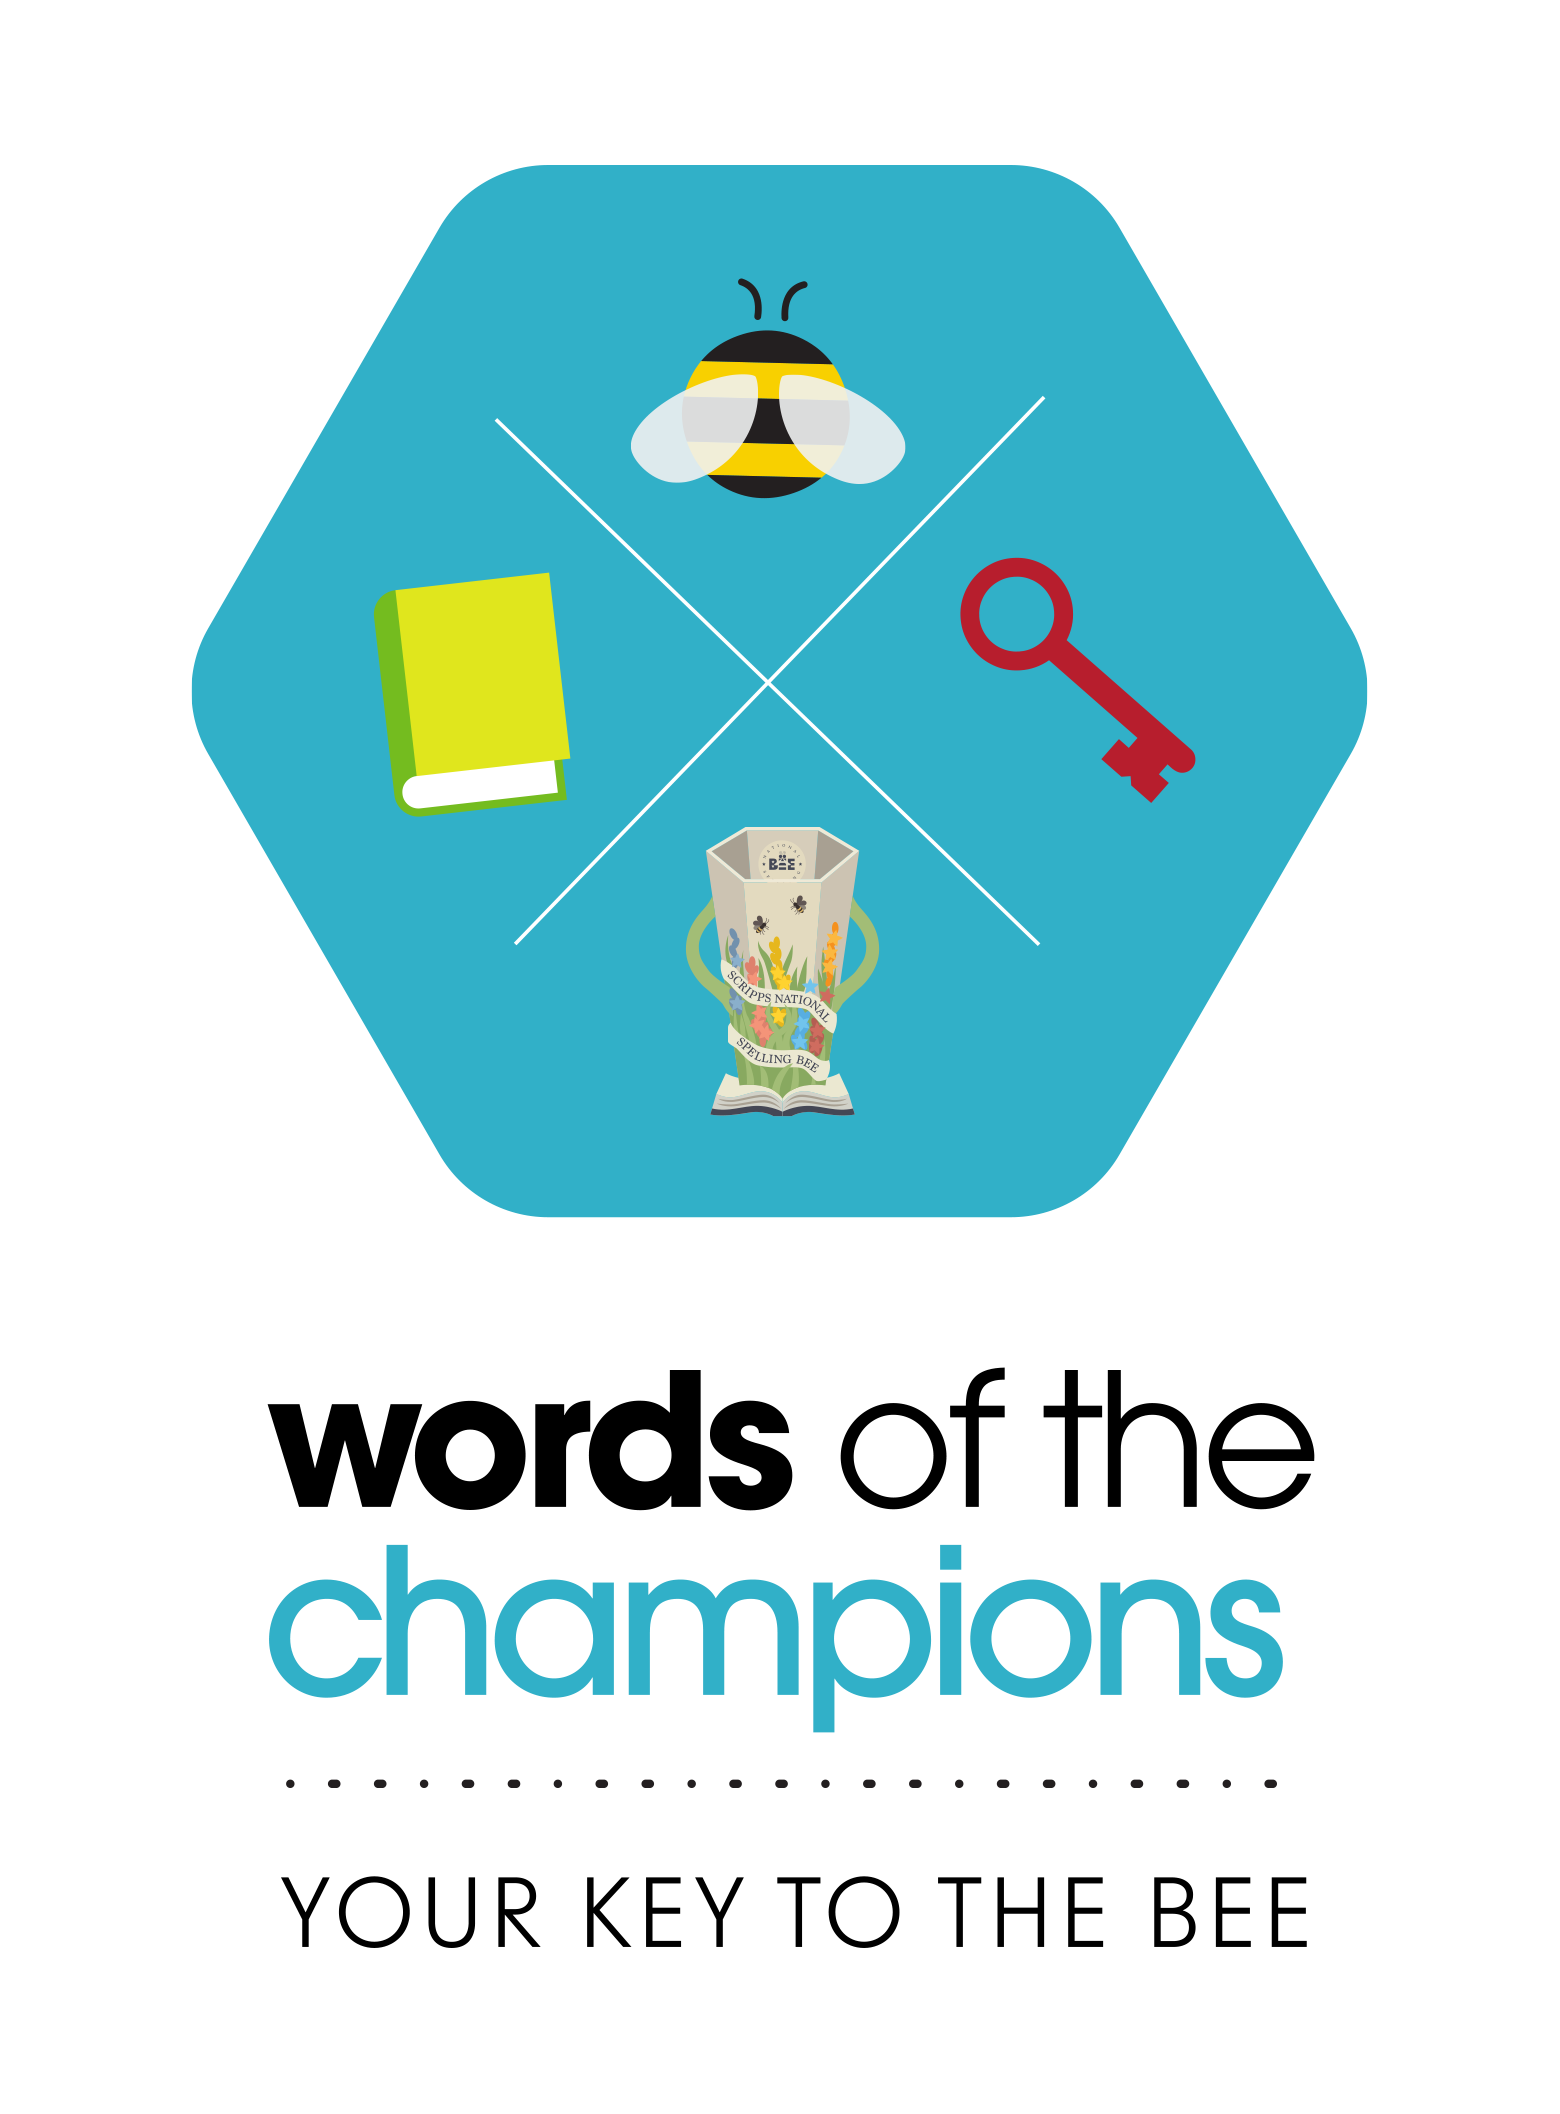 Words of the Champions logo